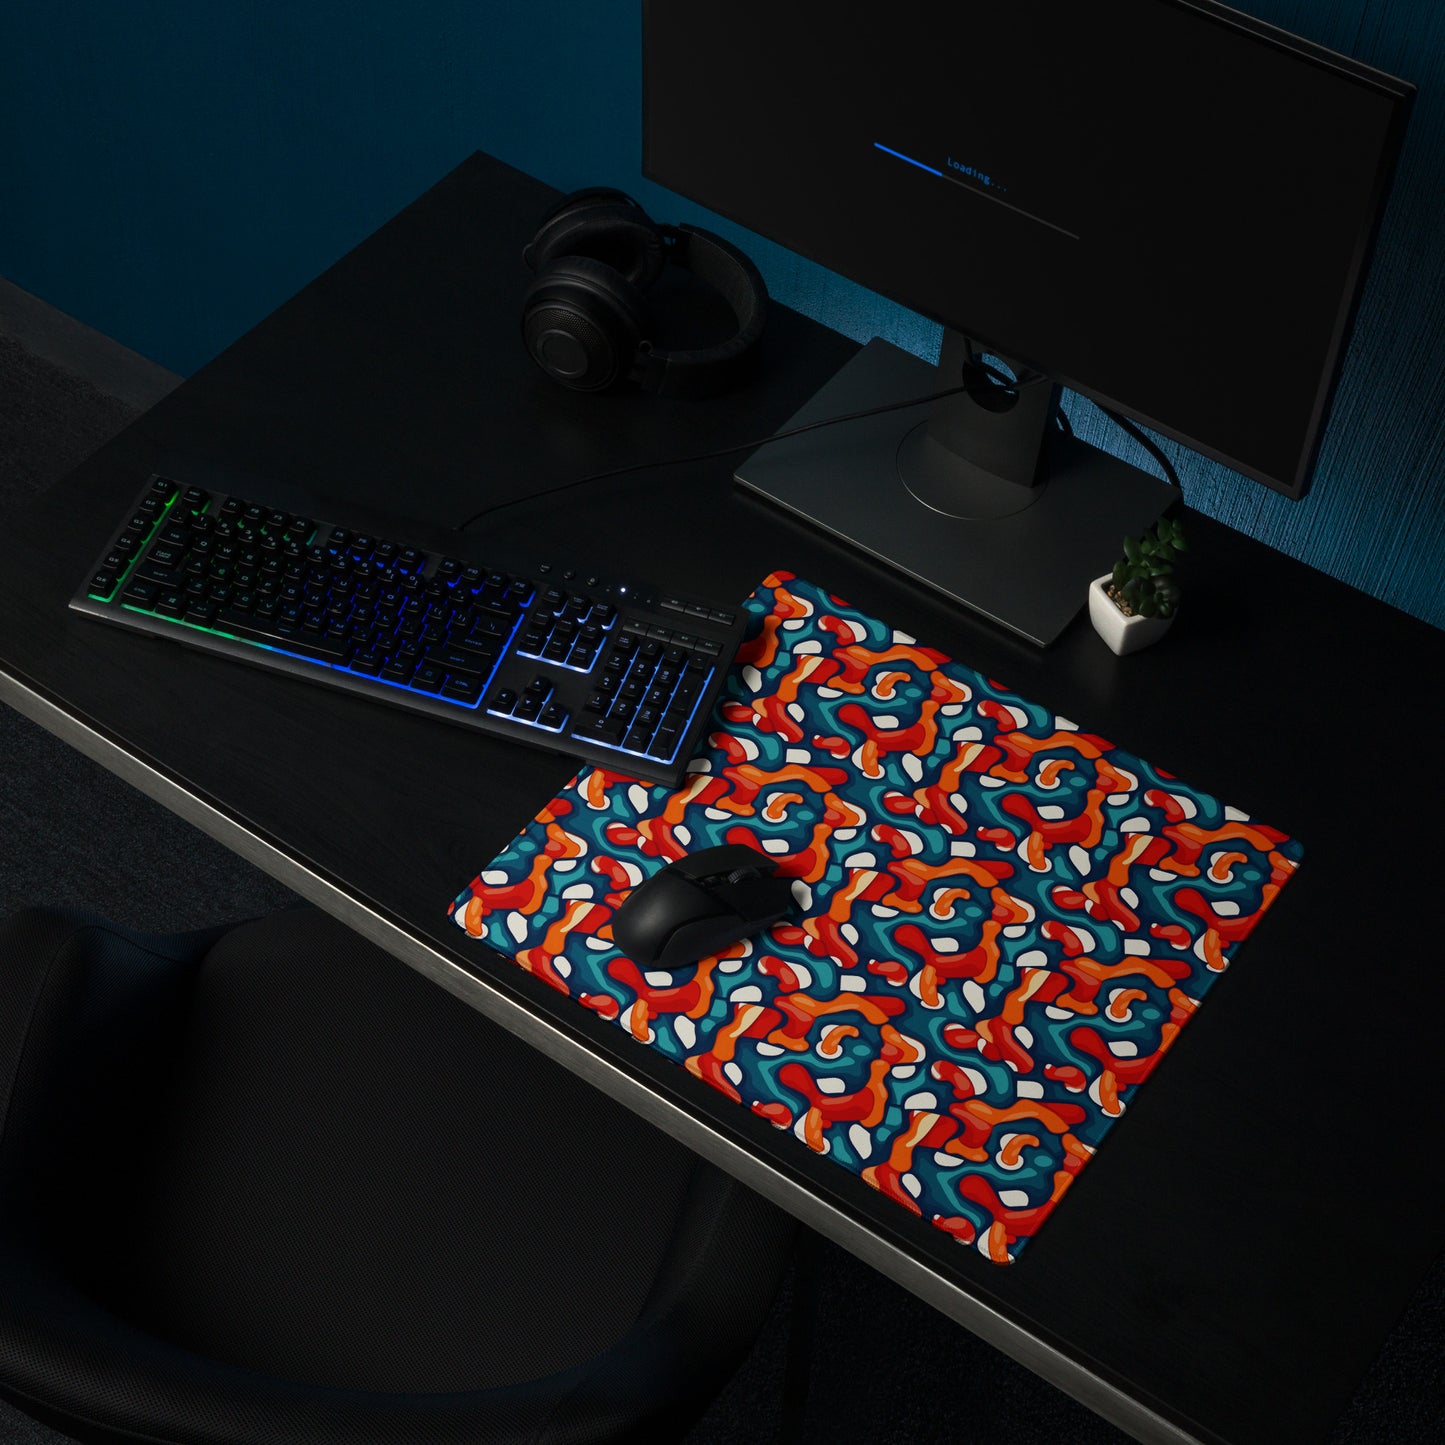 A 18" x 16" desk pad with abstract line art on it shown on a desk setup. Red, Teal and Orange in color.